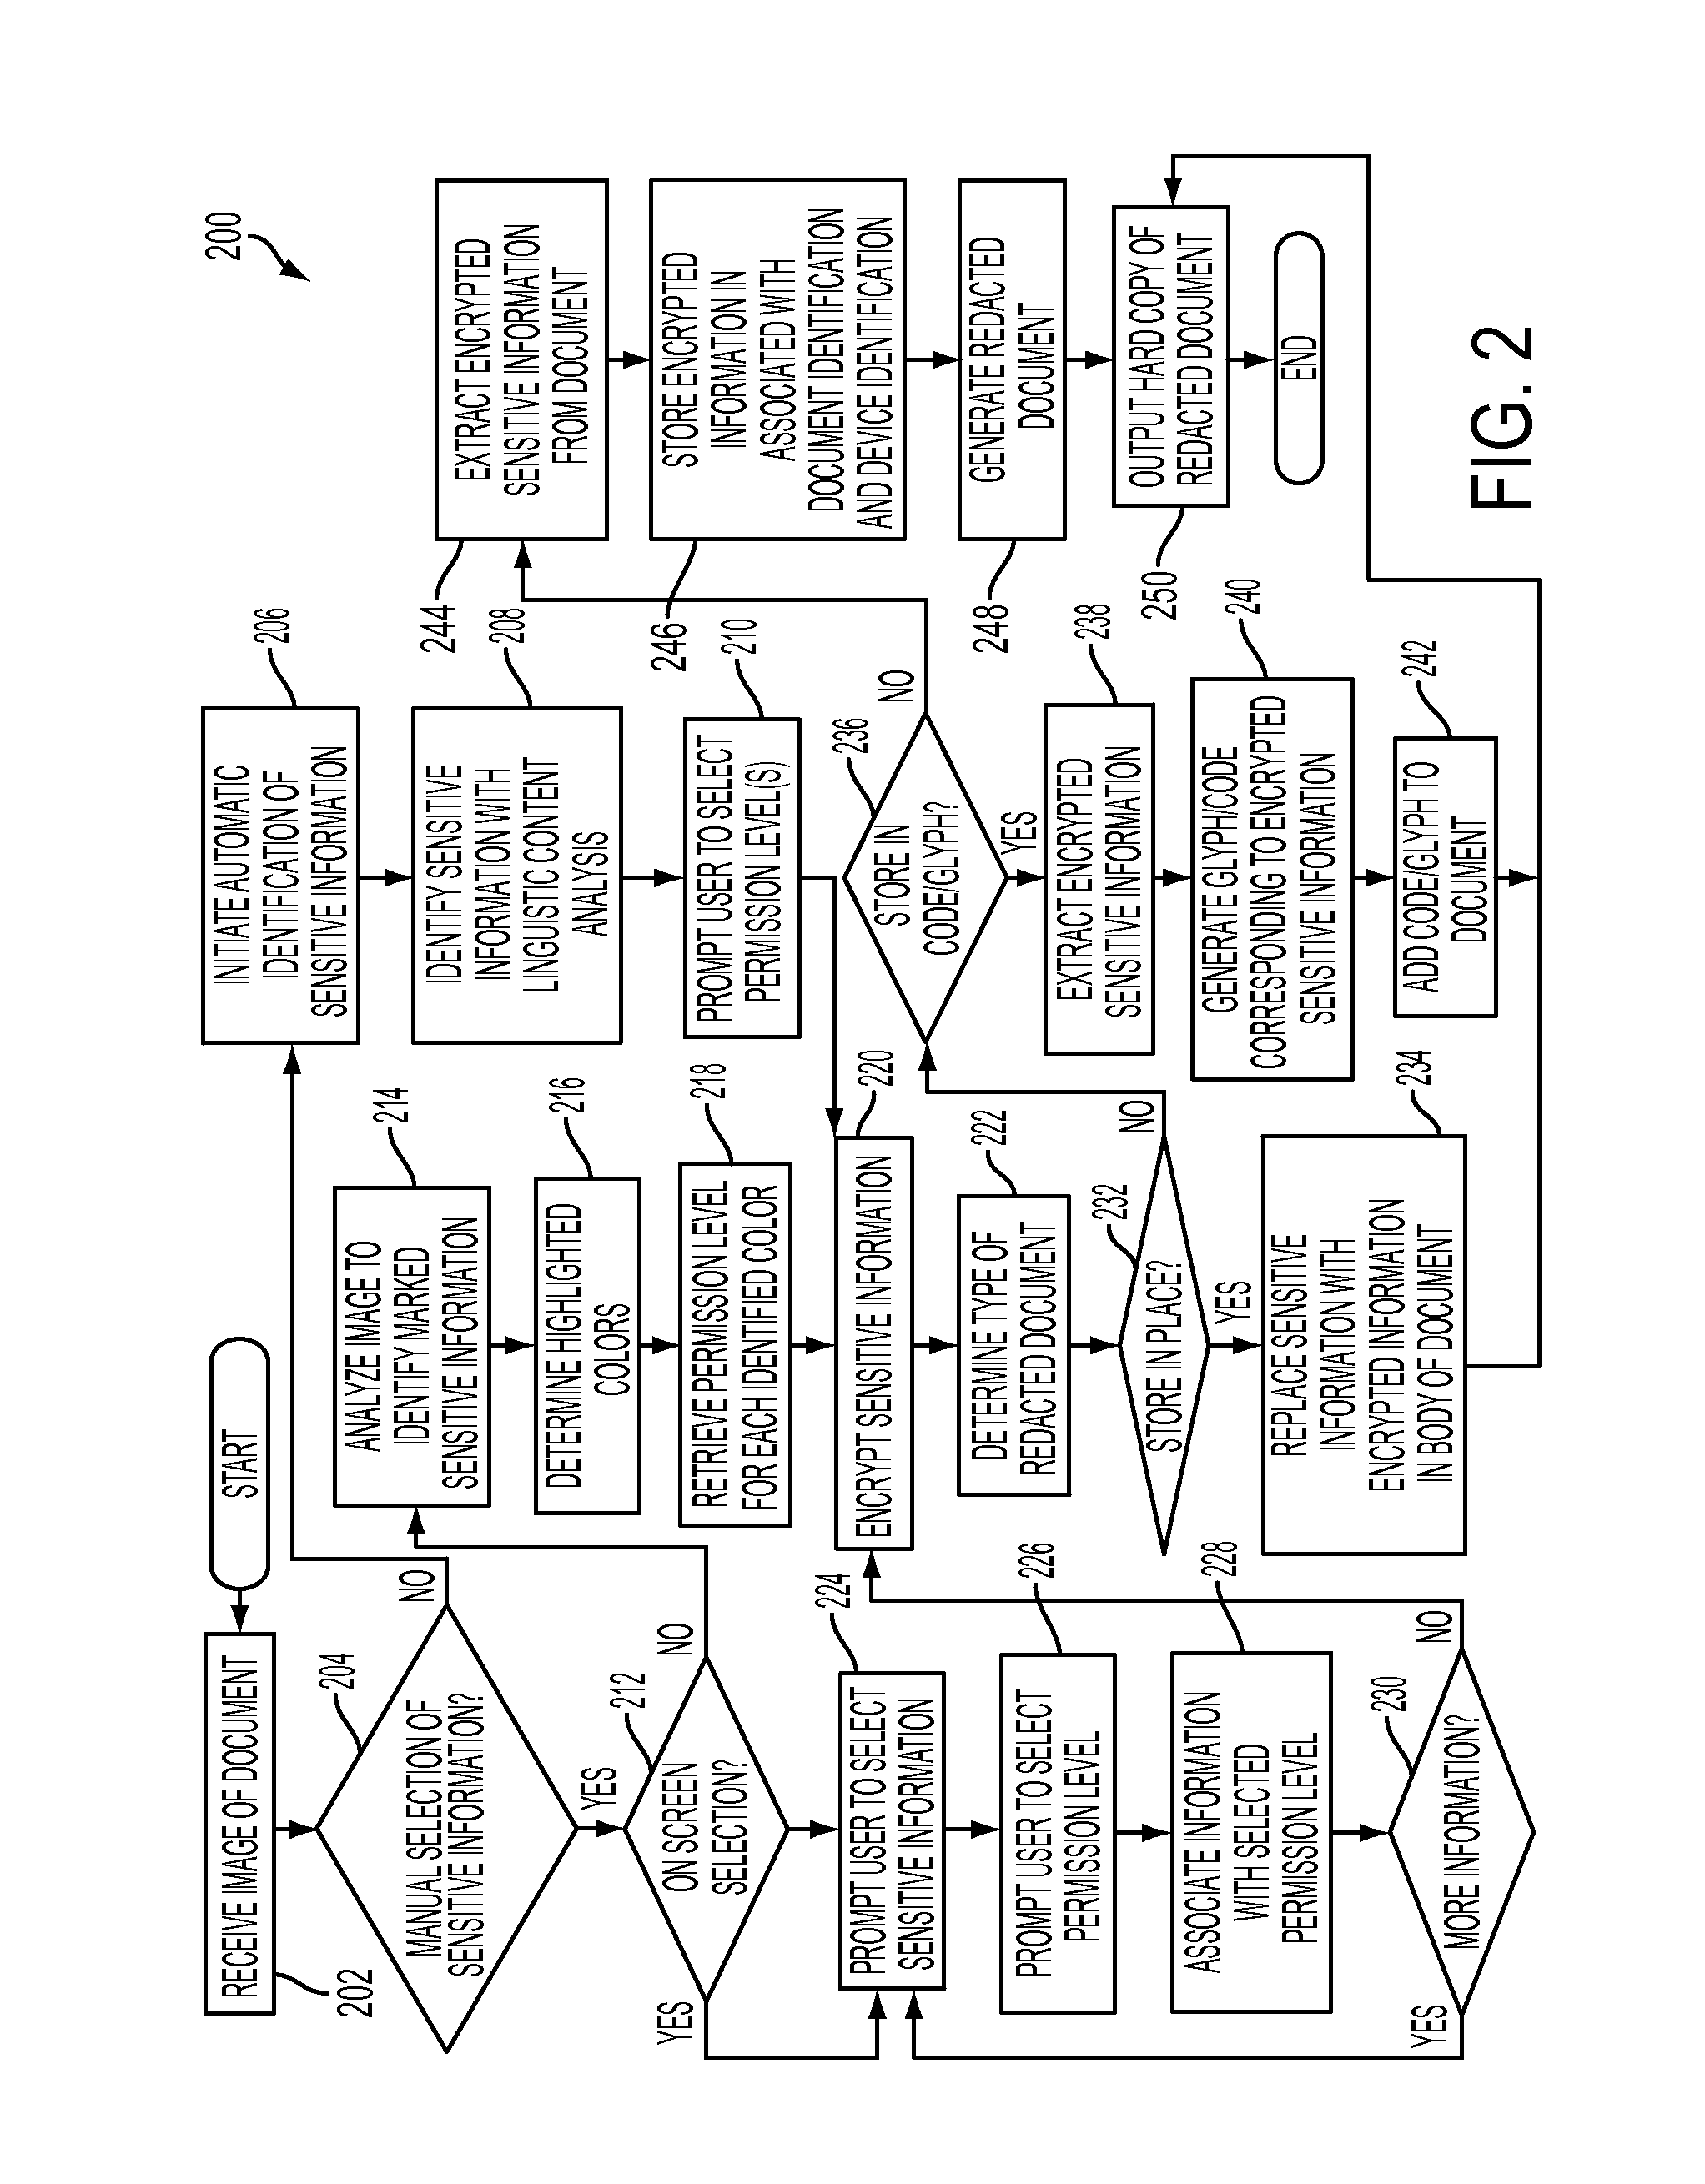 Mobile field level encryption of private documents